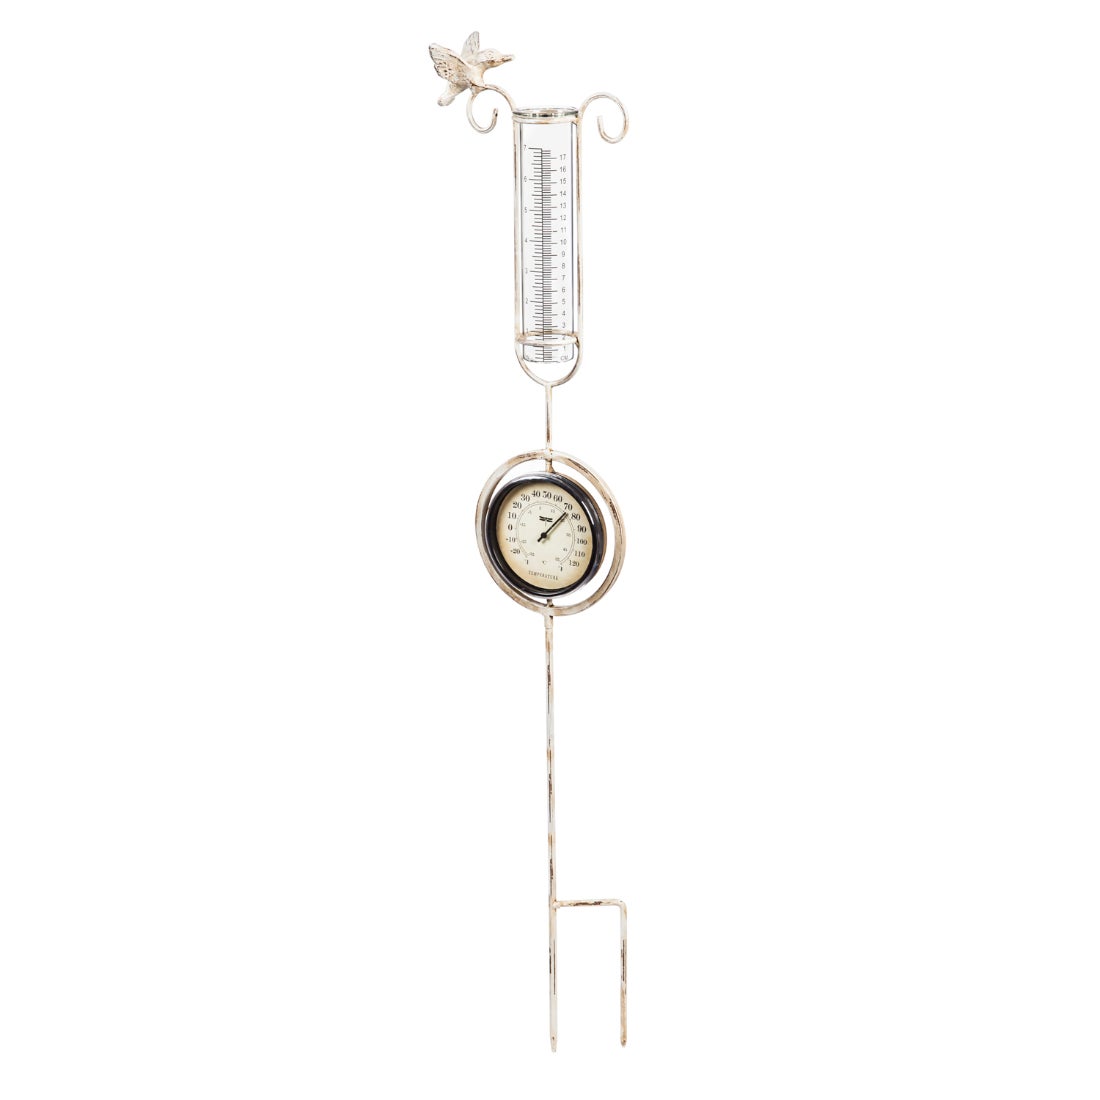 Antique White Metal Thermometer and Rain Gauge Stake